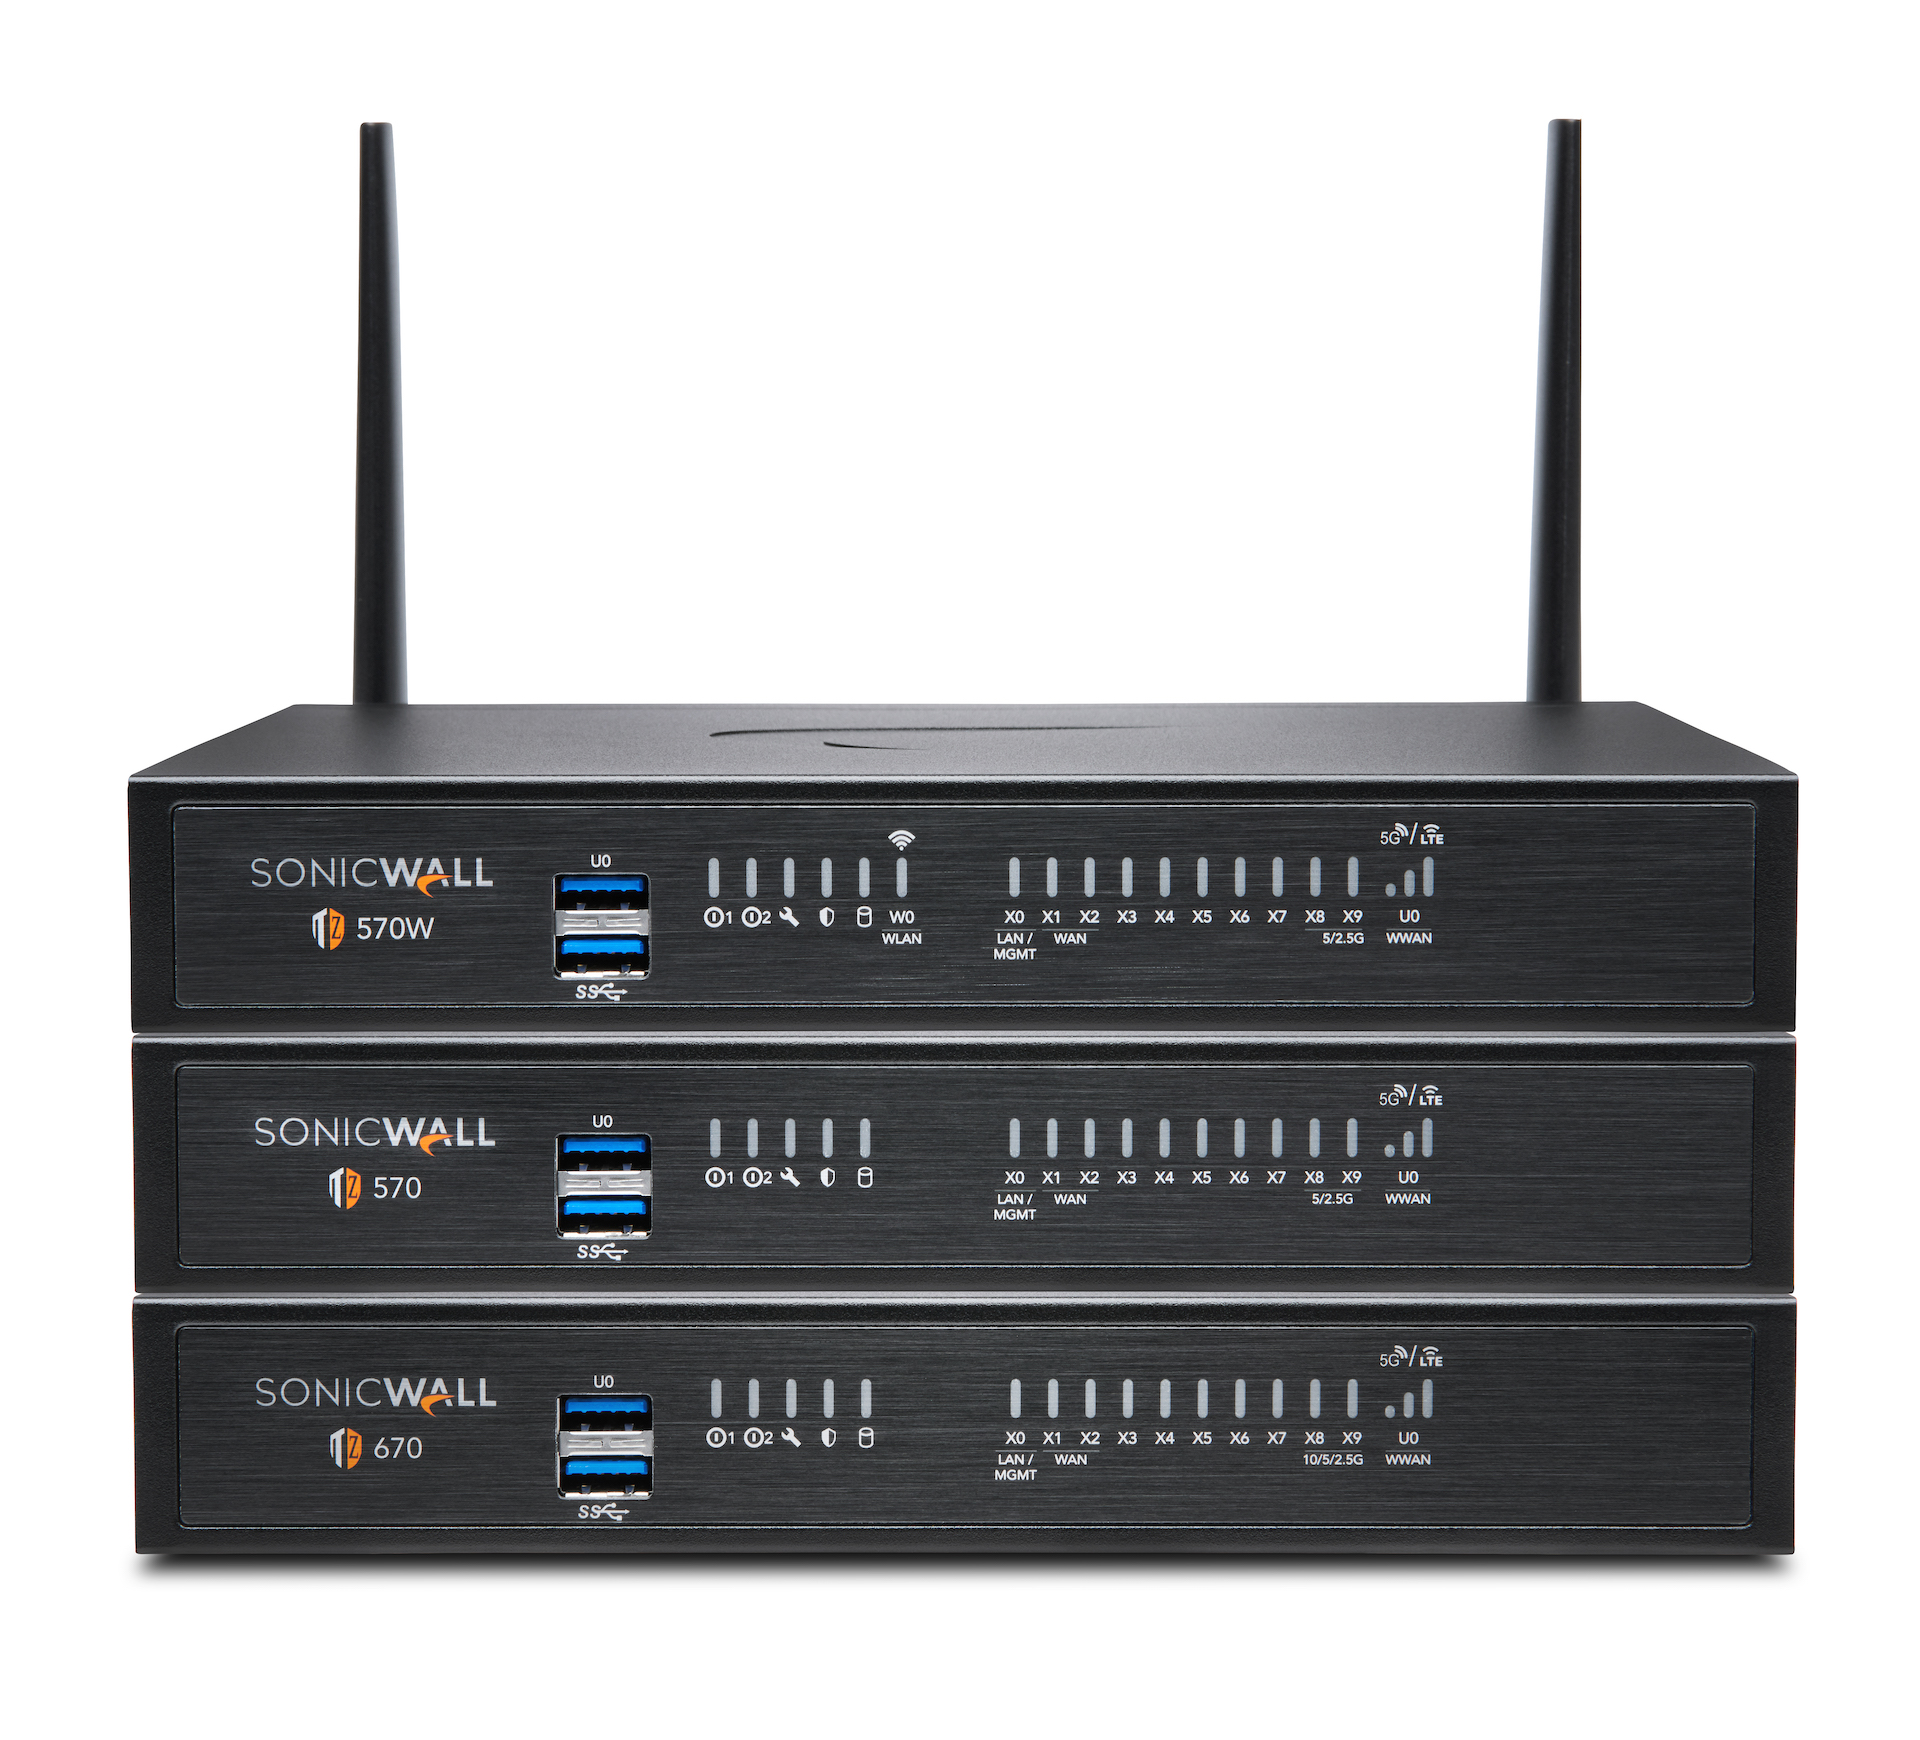 Image for SonicWall Leads SMB Market To Resolve Stretched Security Budgets, Risks For Newly Extended Remote Workforces